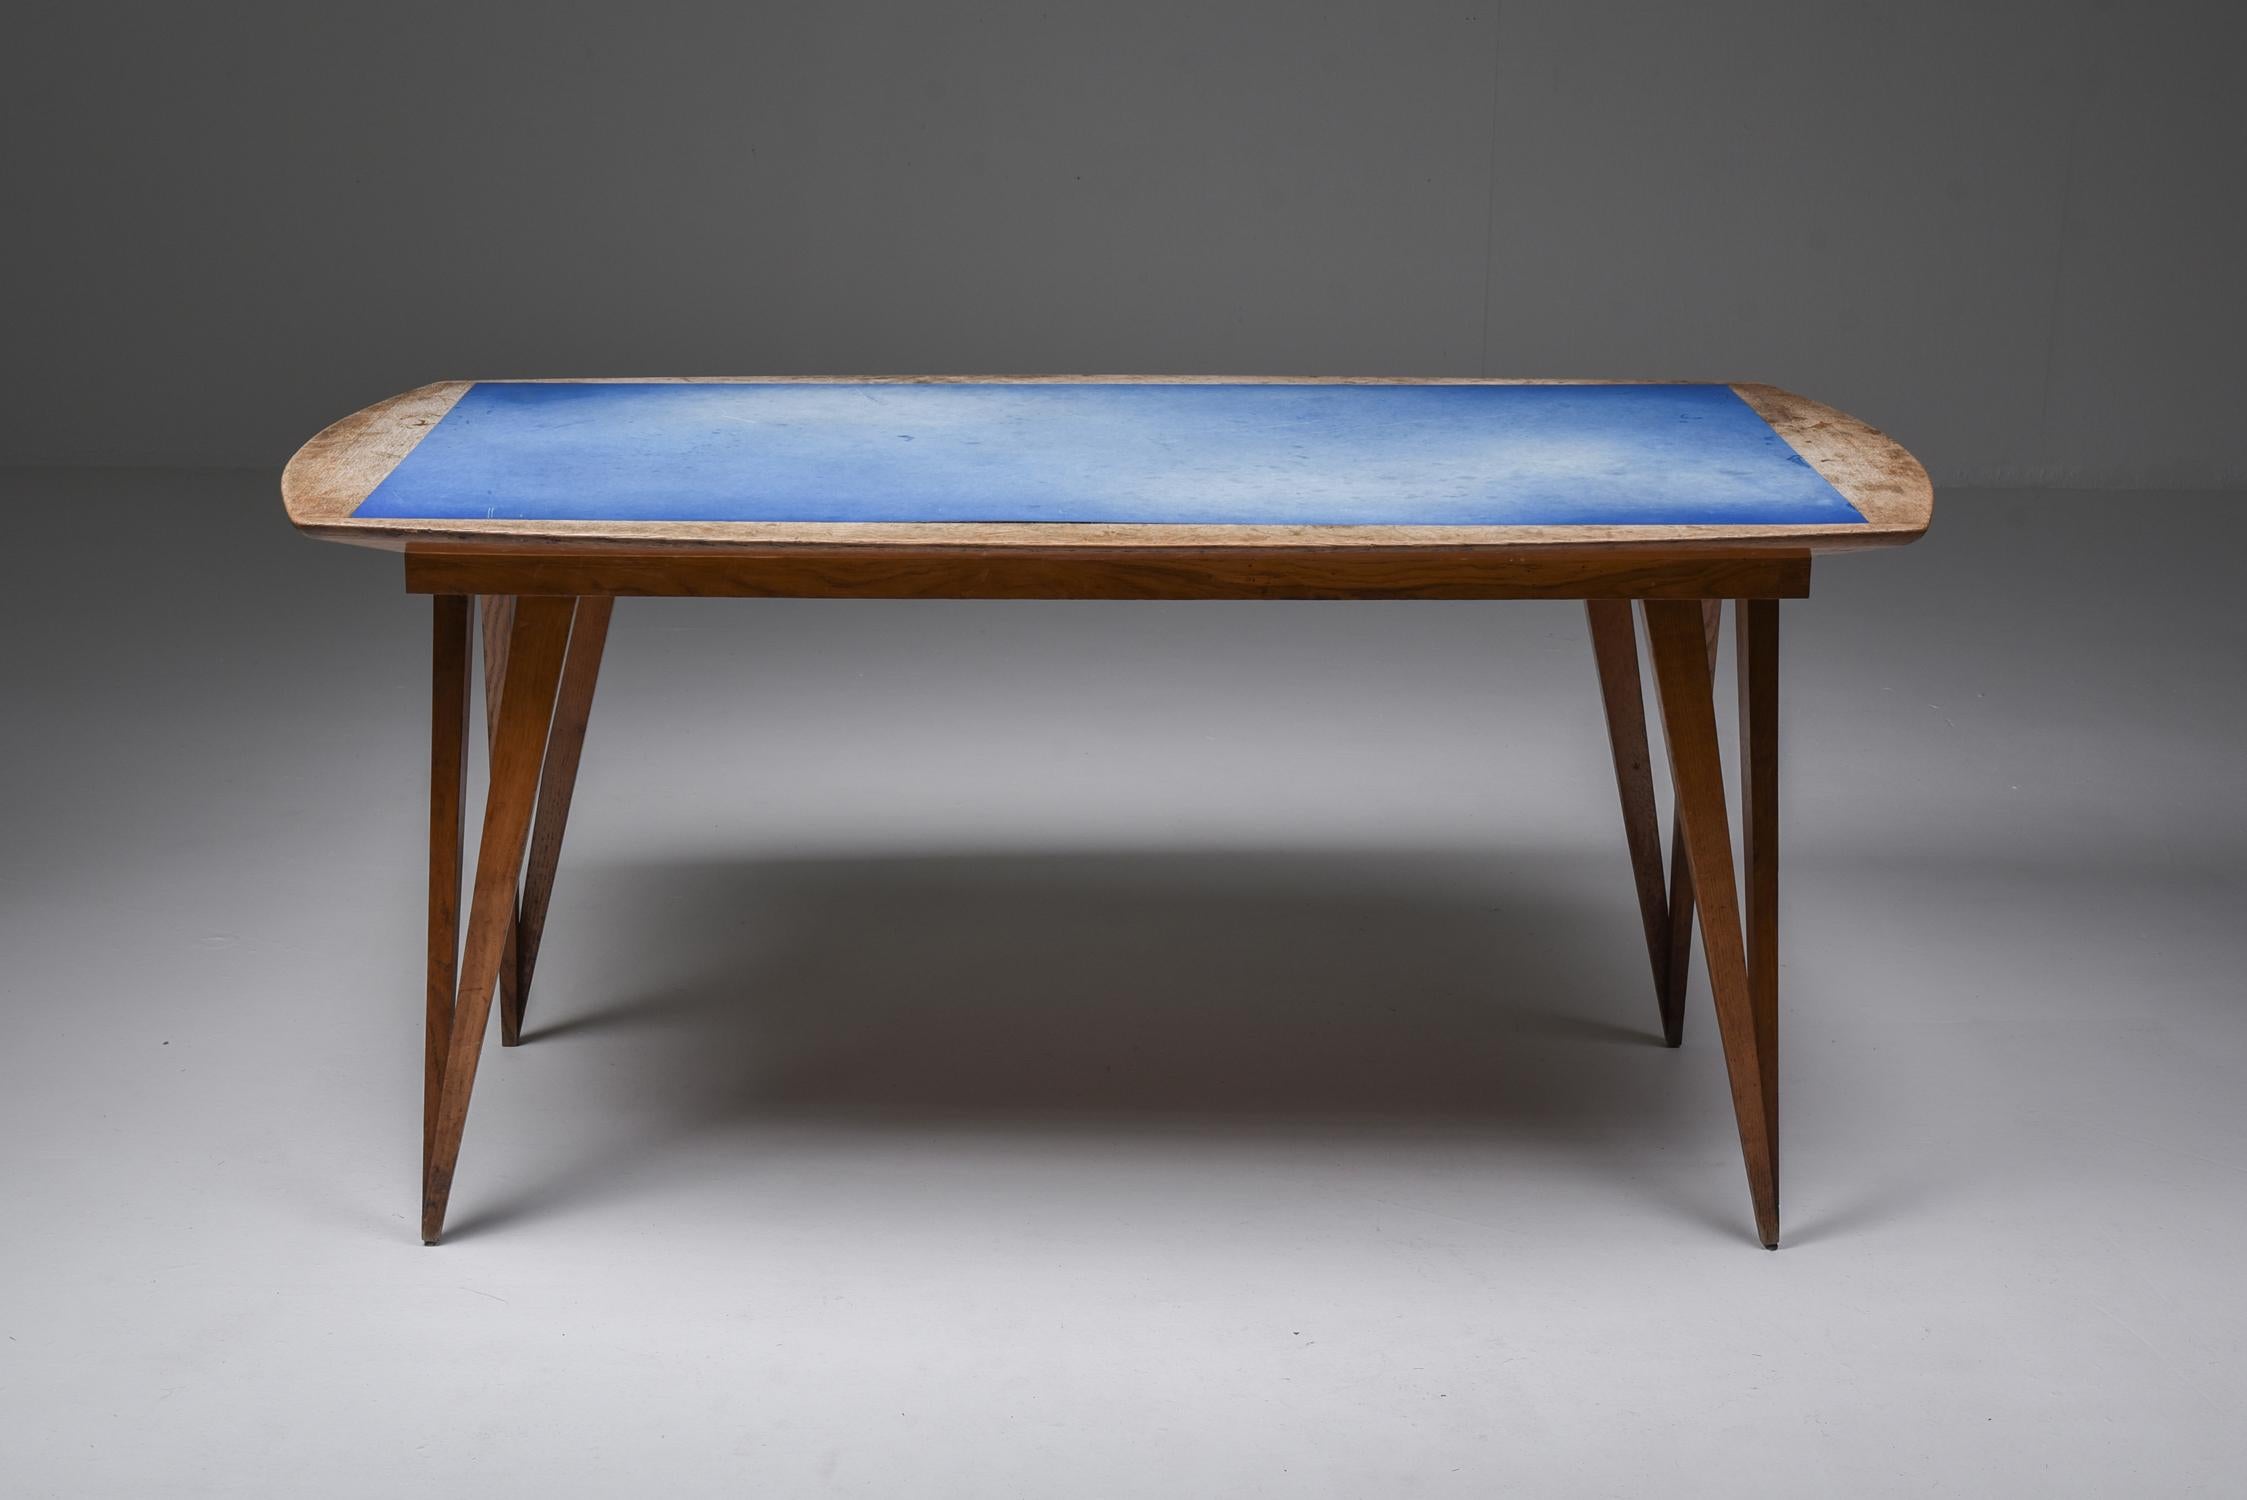 Early Mid-Century Modern dining table, solid oak, blue Formica top, Italy, 1940s

Unusual dining table from the 1940s on pin legs with a blue Formica top in original condition.

The legs and frame are solid oak, which have gained an unmatched